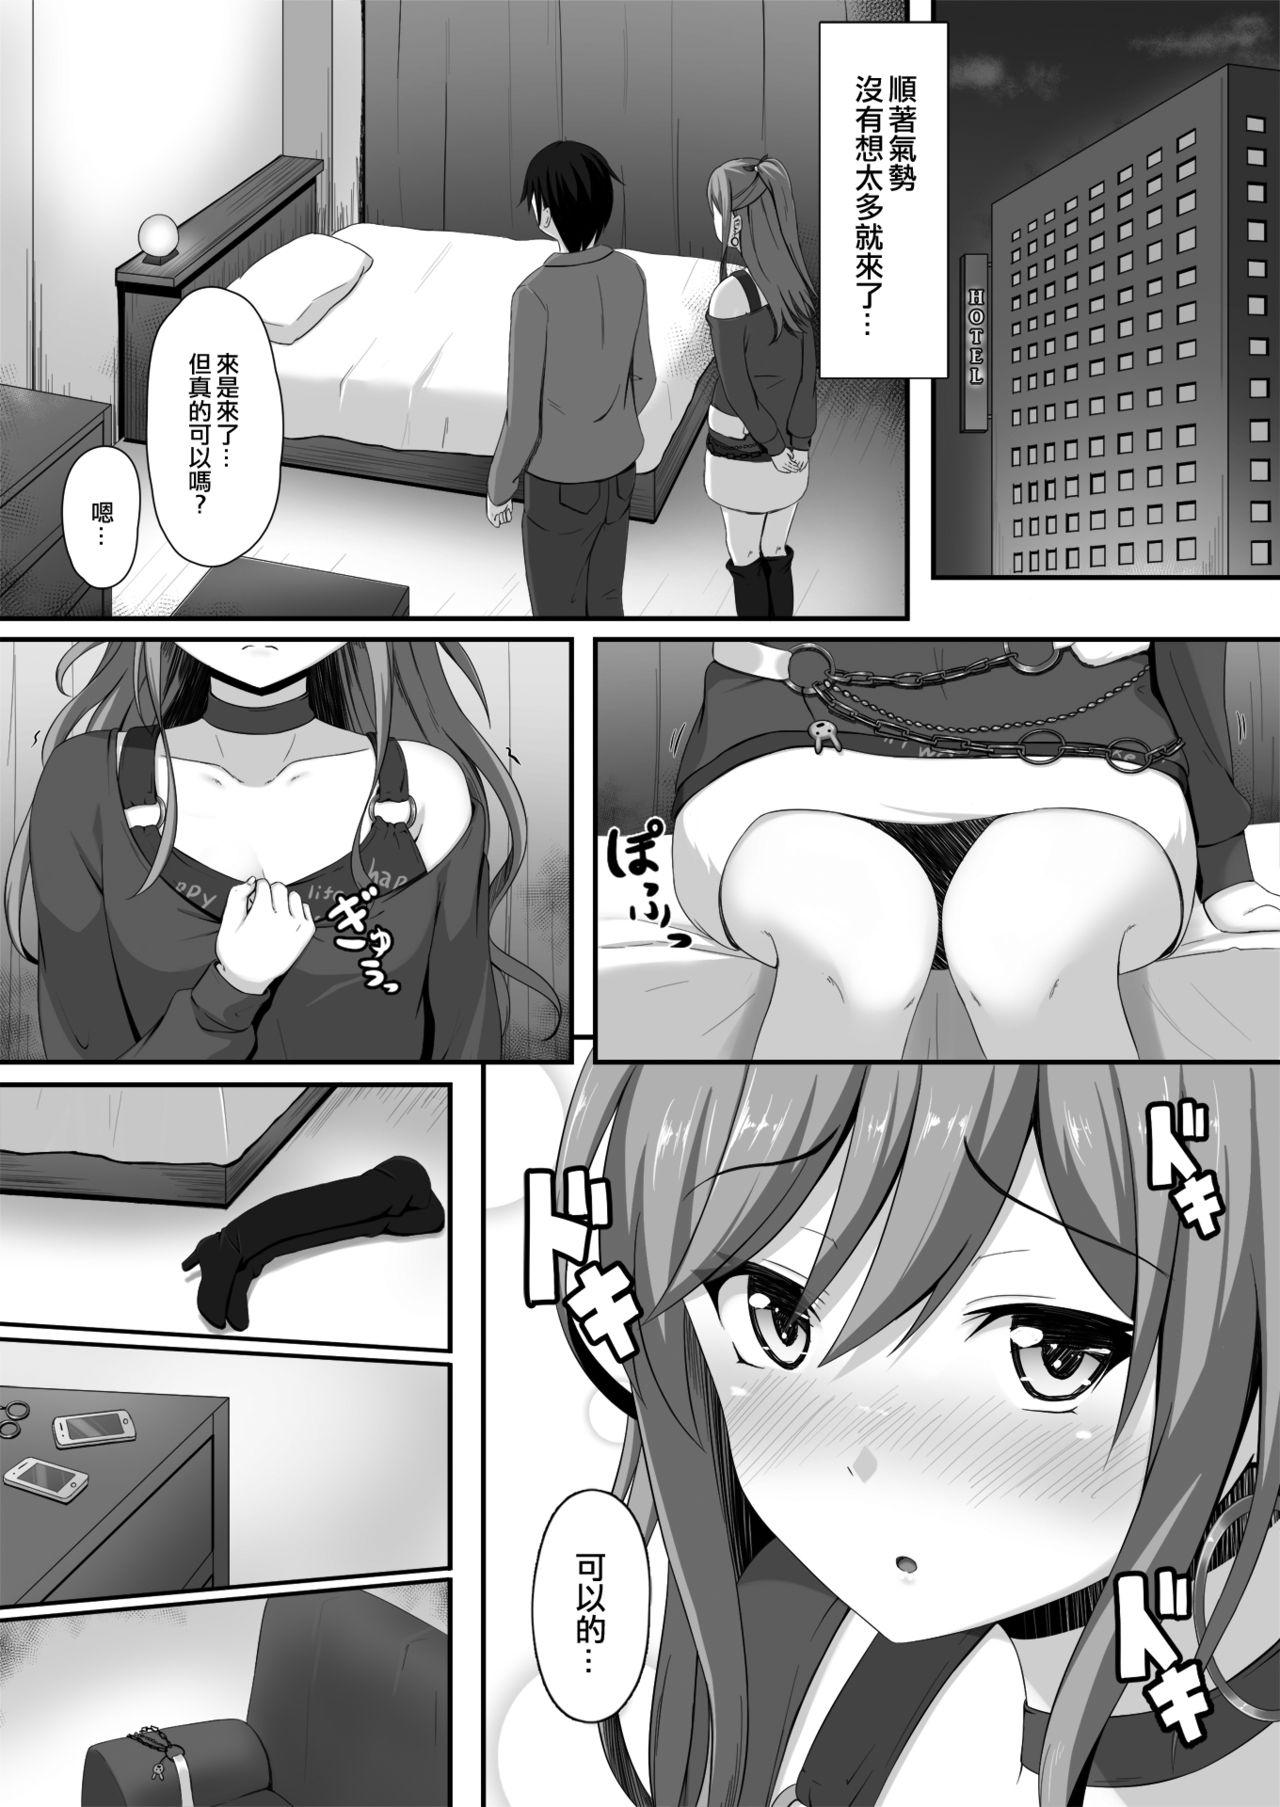 Screaming Route Episode in Lisa Nee | Route Episode in 莉莎姊 - Bang dream Women Sucking - Page 9